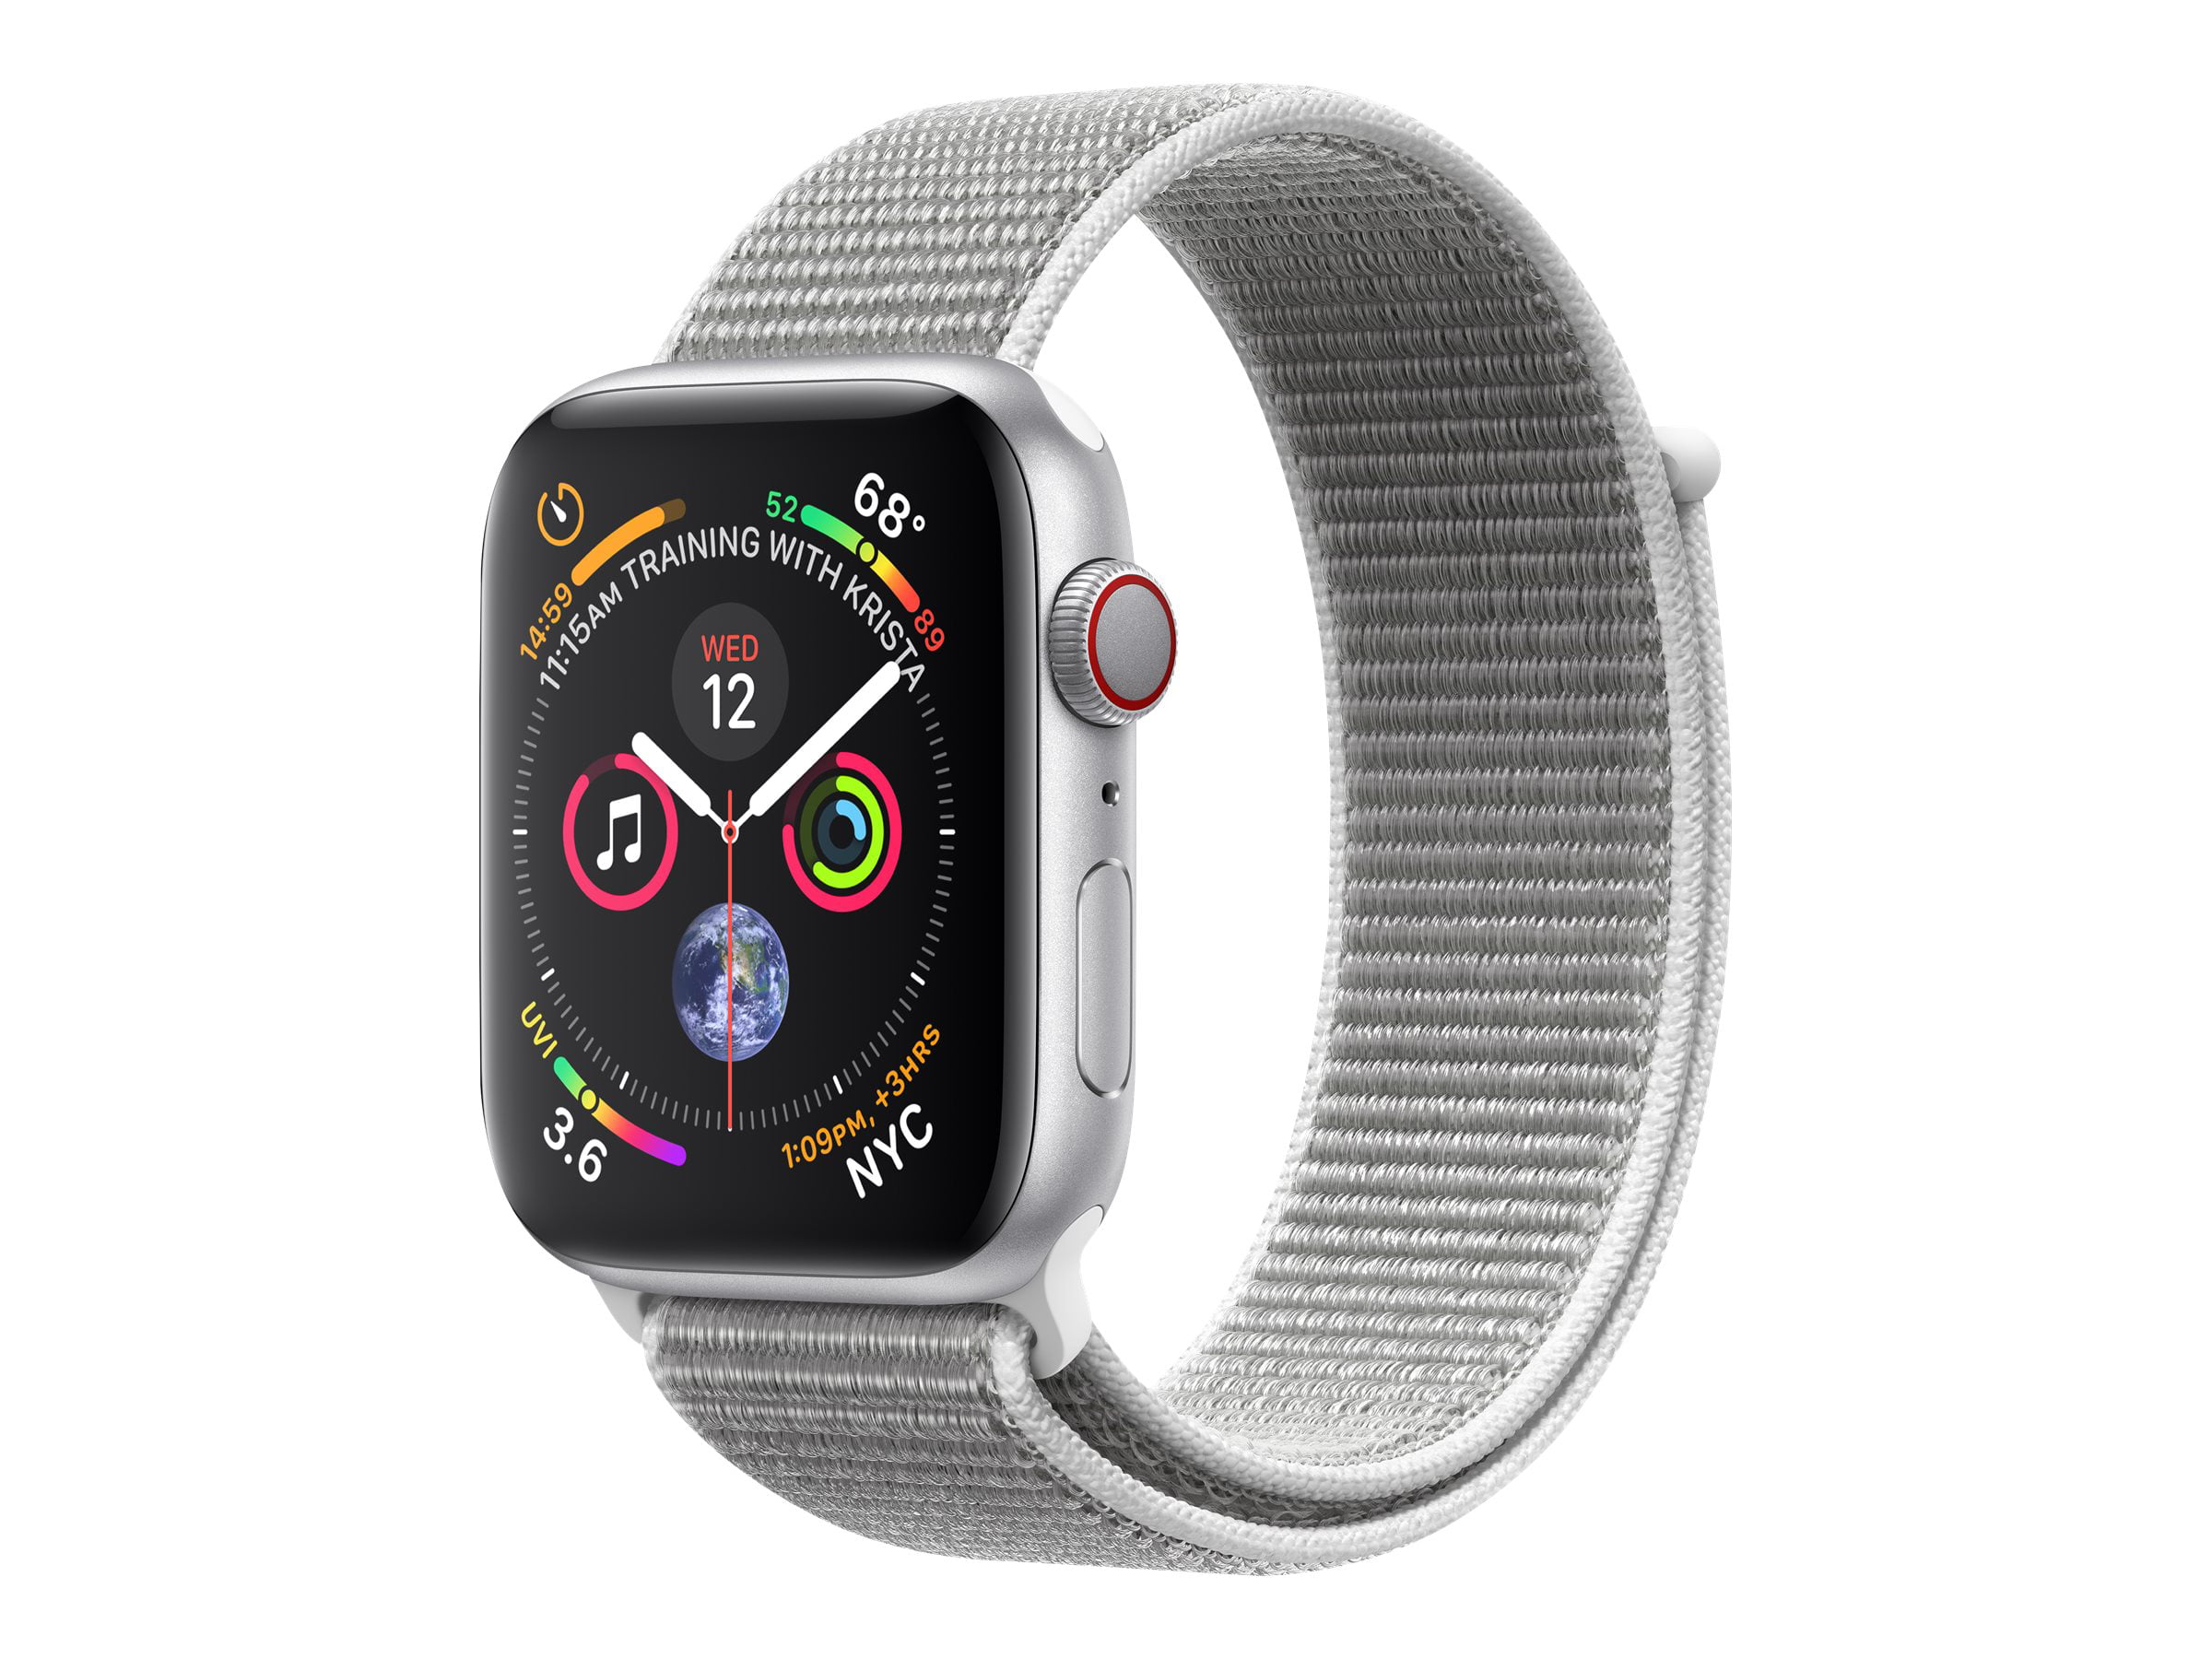 Apple Watch Series 4 (GPS + Cellular) - 44 mm - space gray 